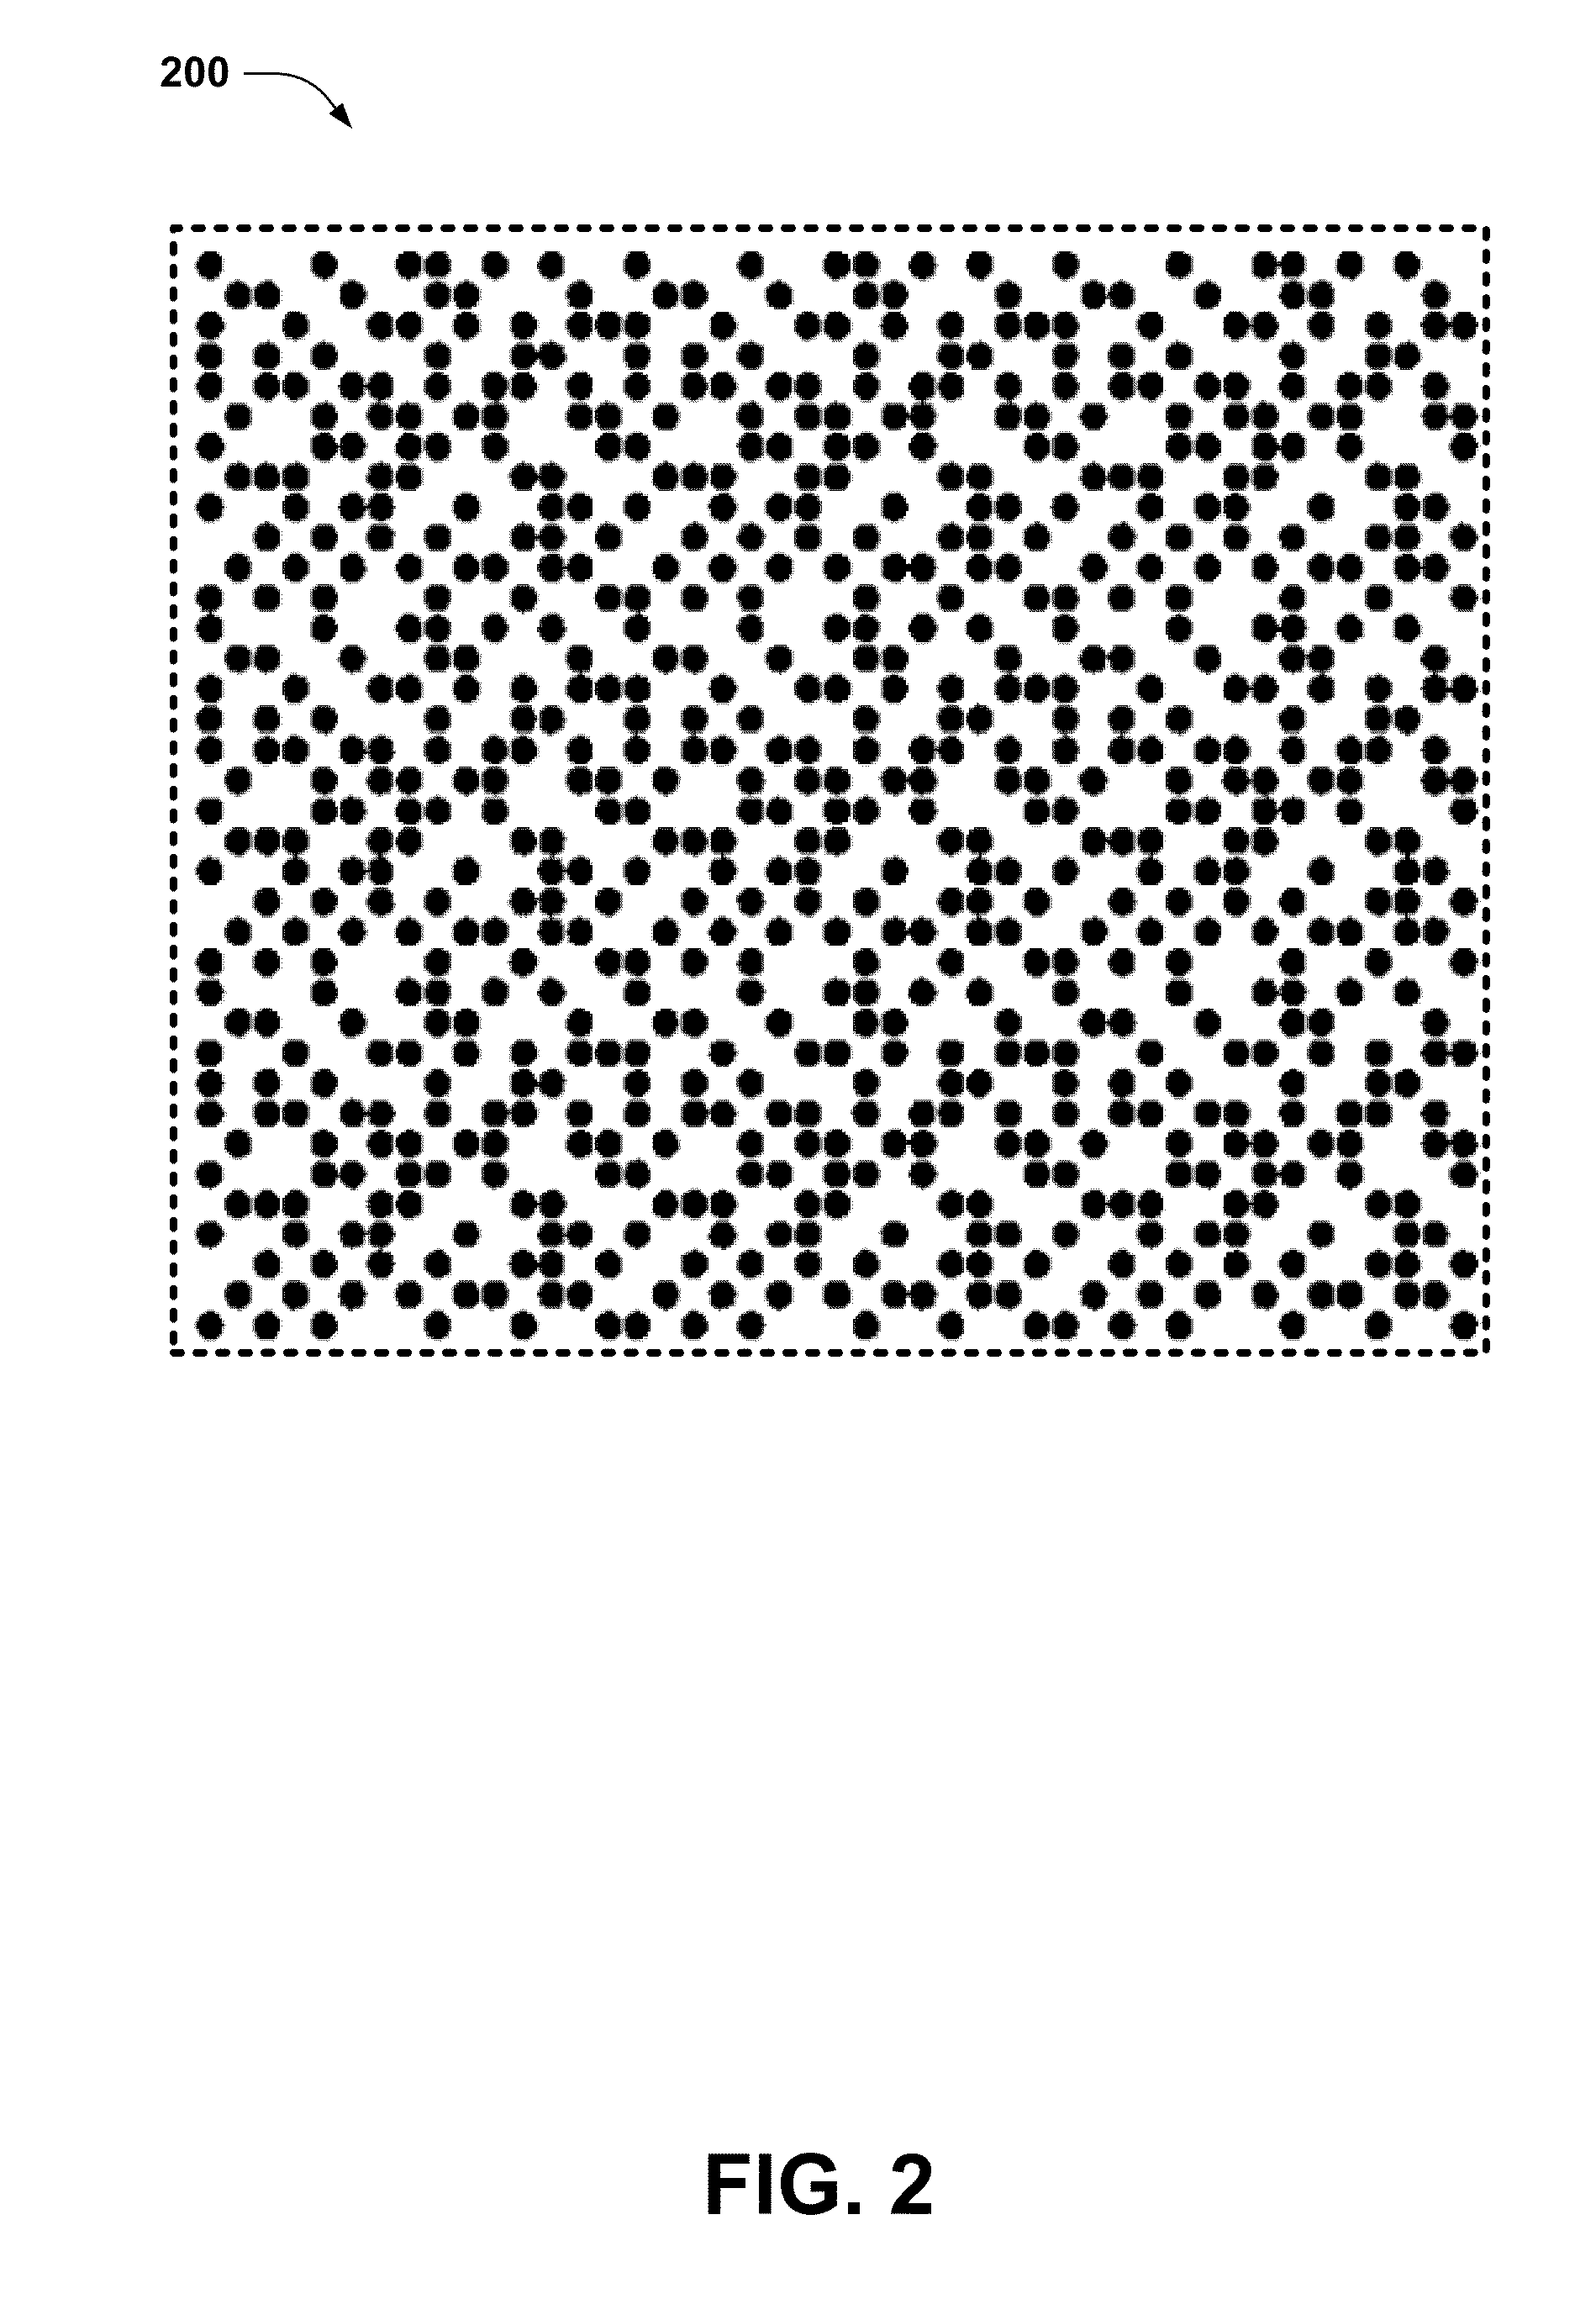 Barcode Tagging